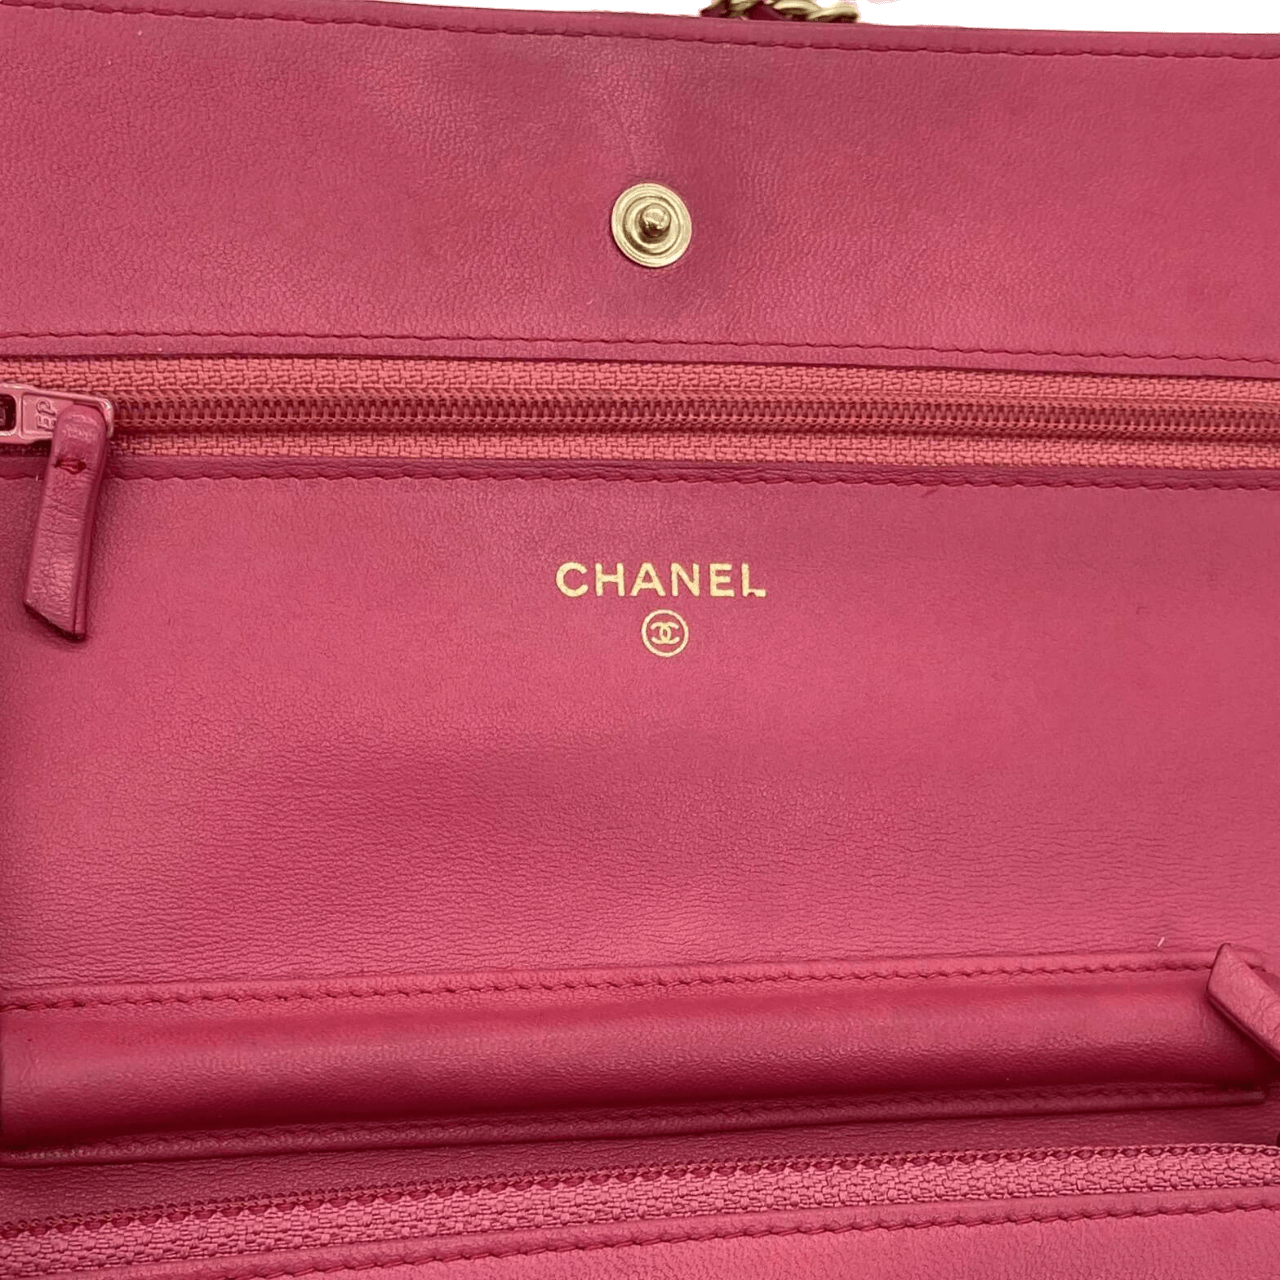 chanel wallet pink leather